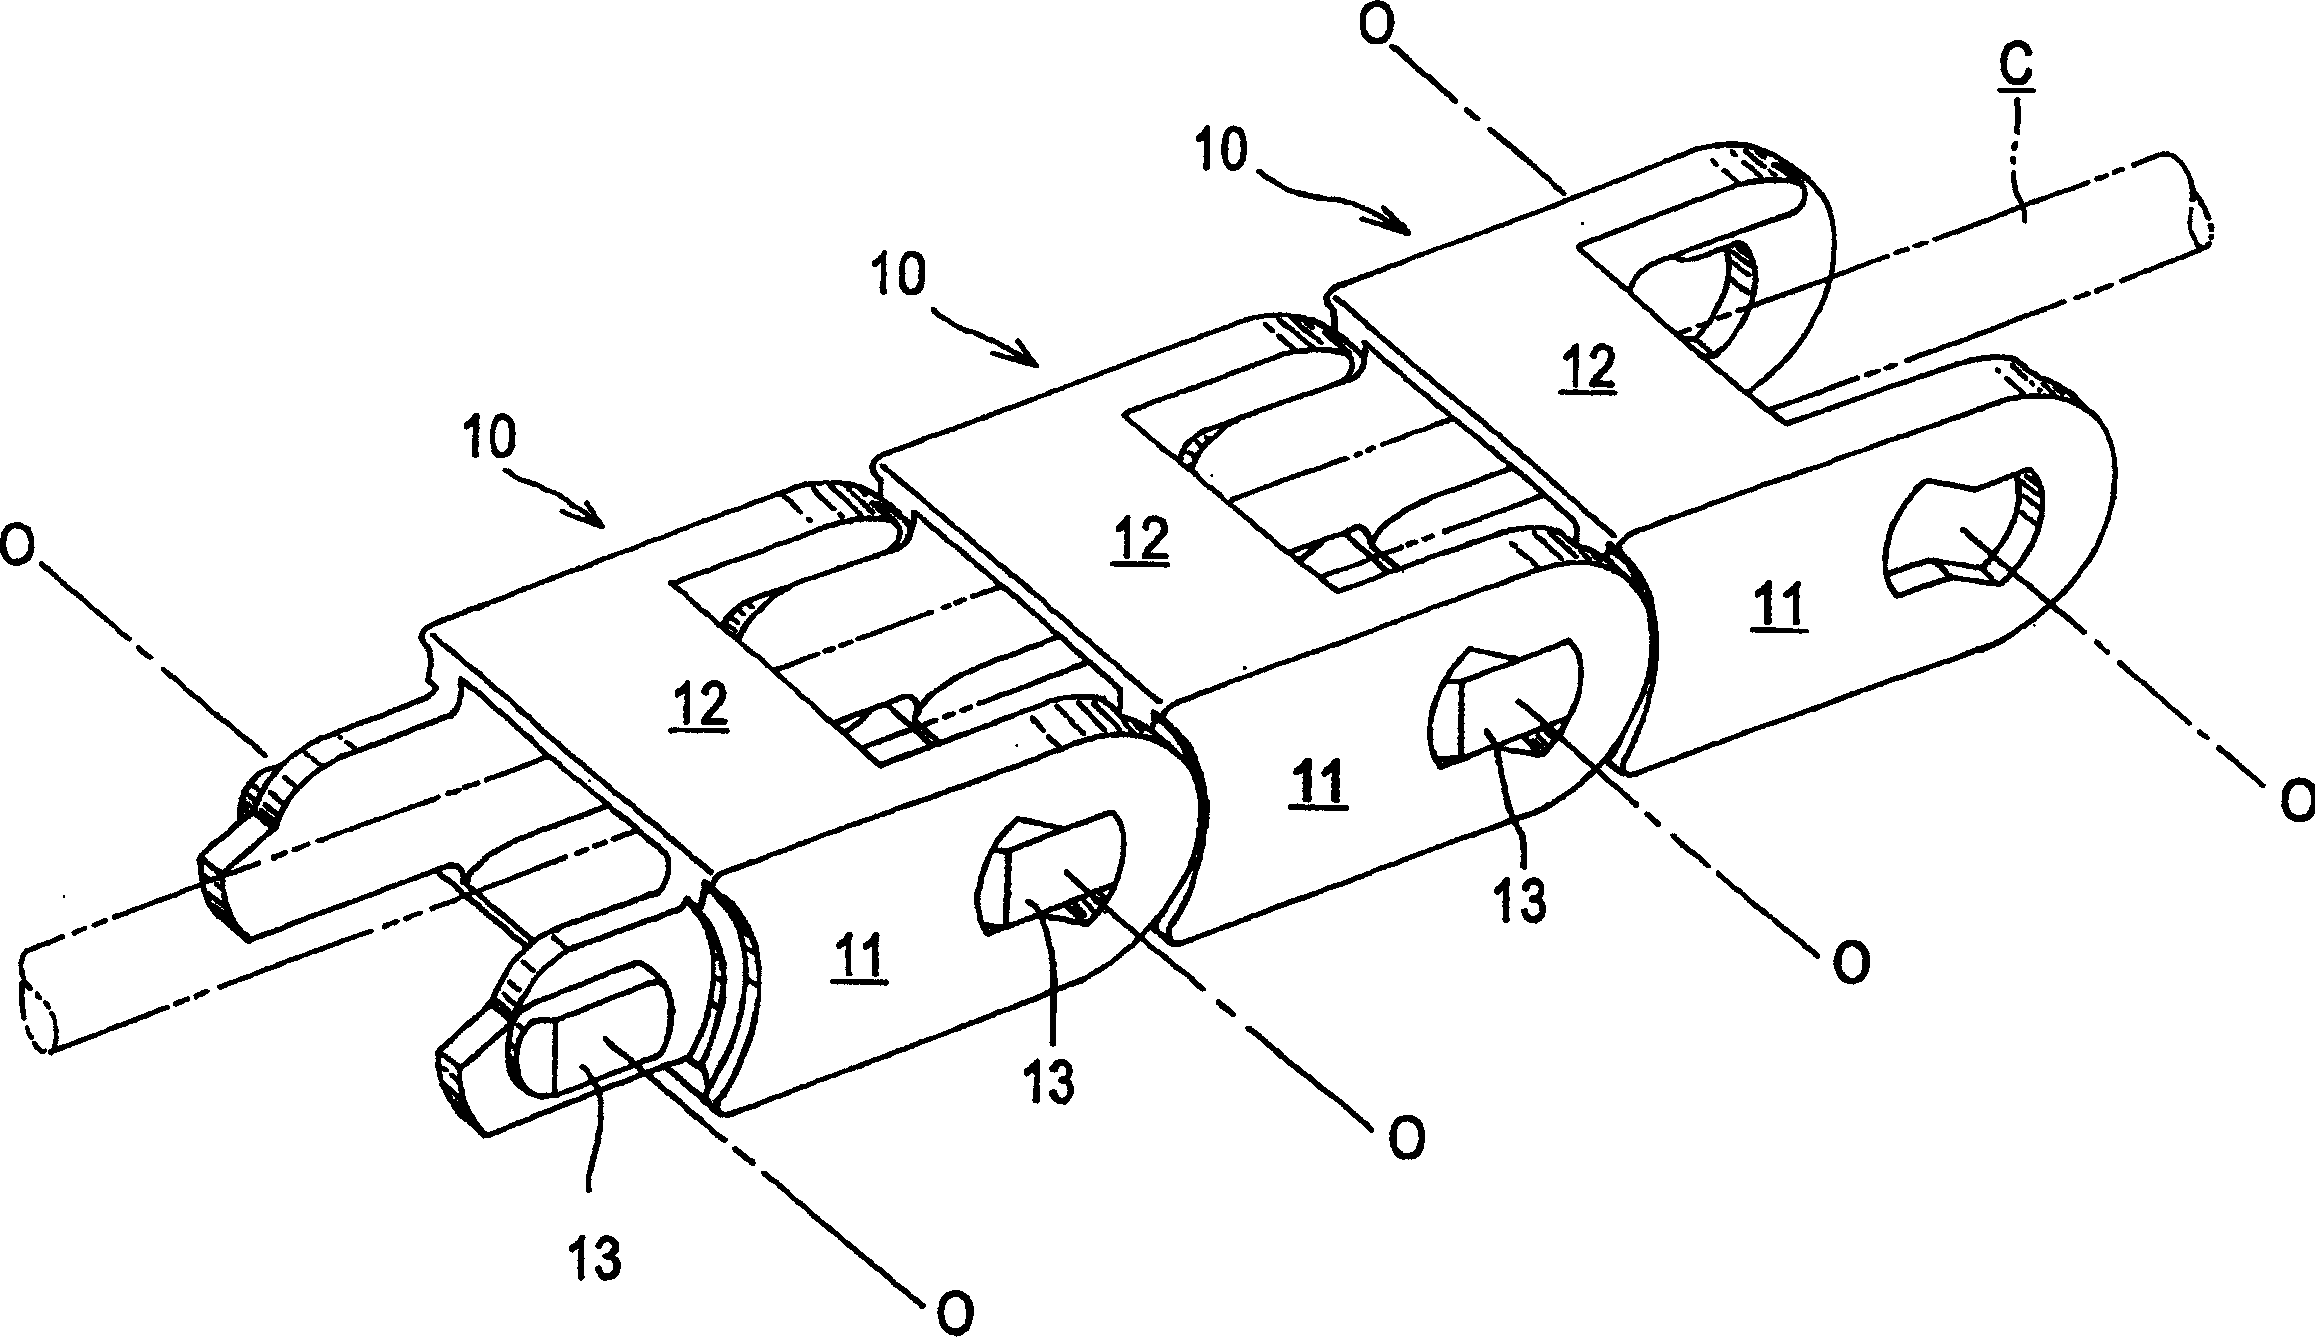 Protection and guidance apparatus for cable and the like